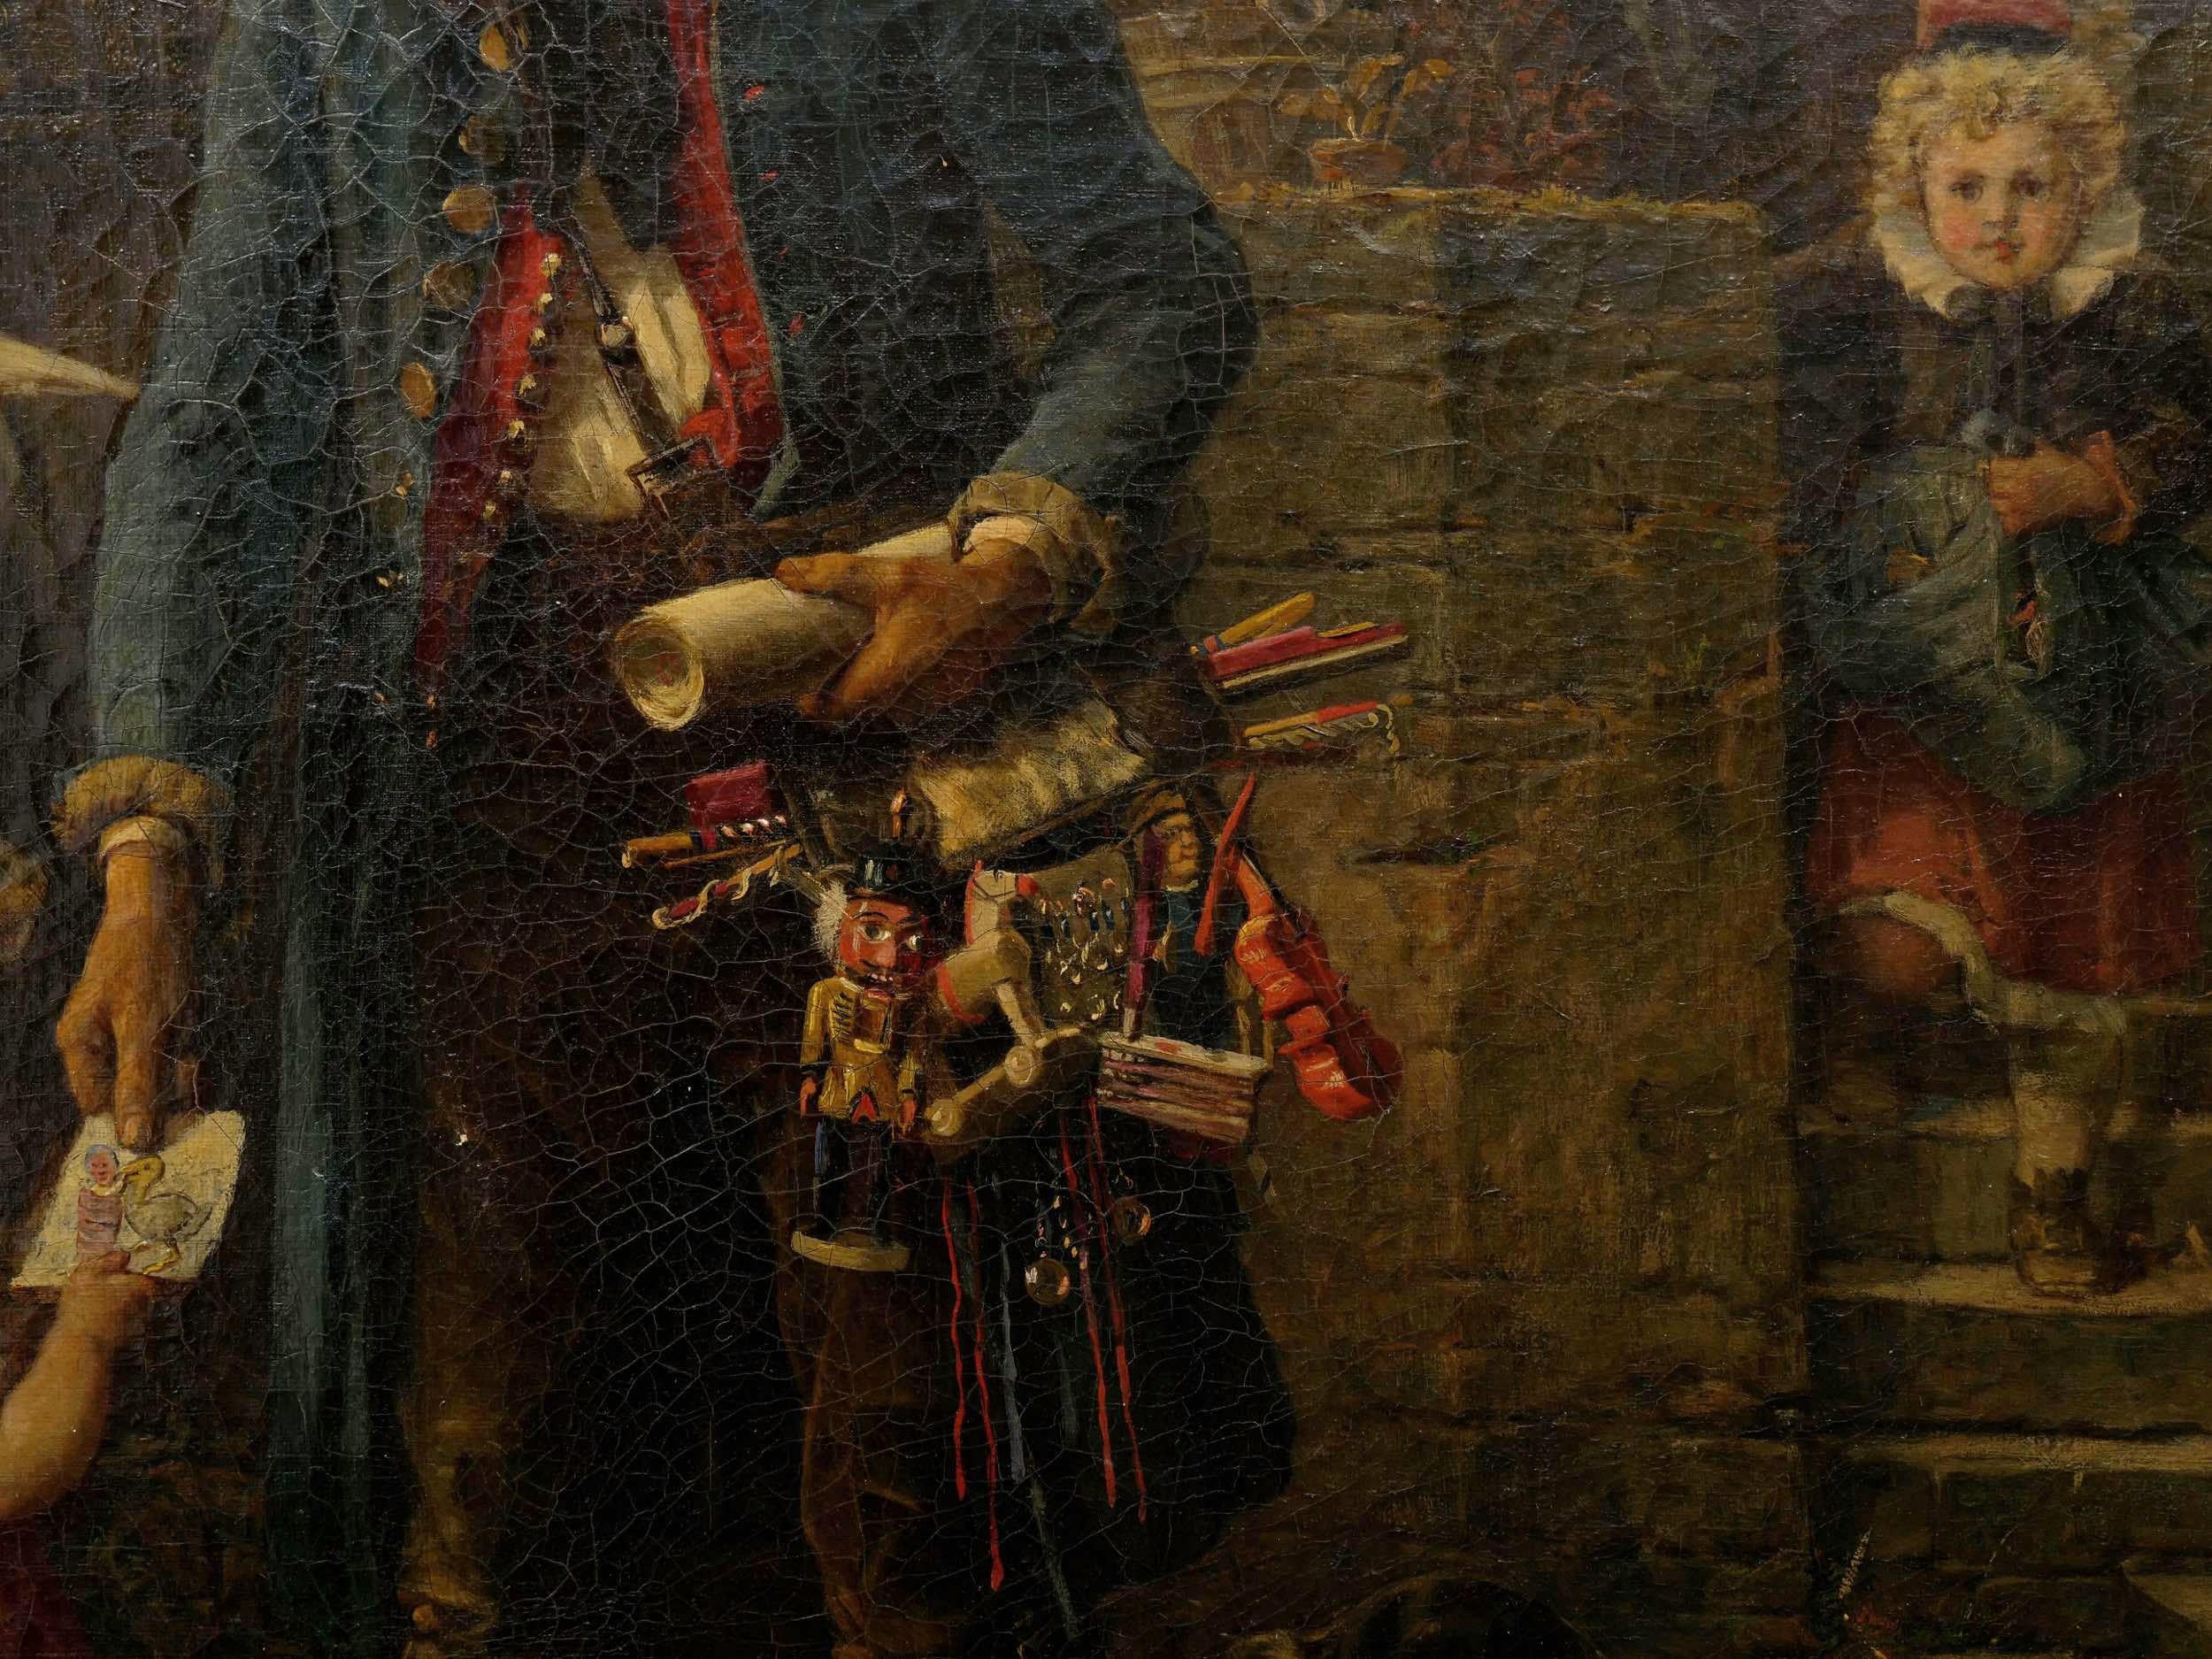 “The Toy Seller” (1874) Antique Oil Painting by Fritz Beinke (German, 1842-1907 6